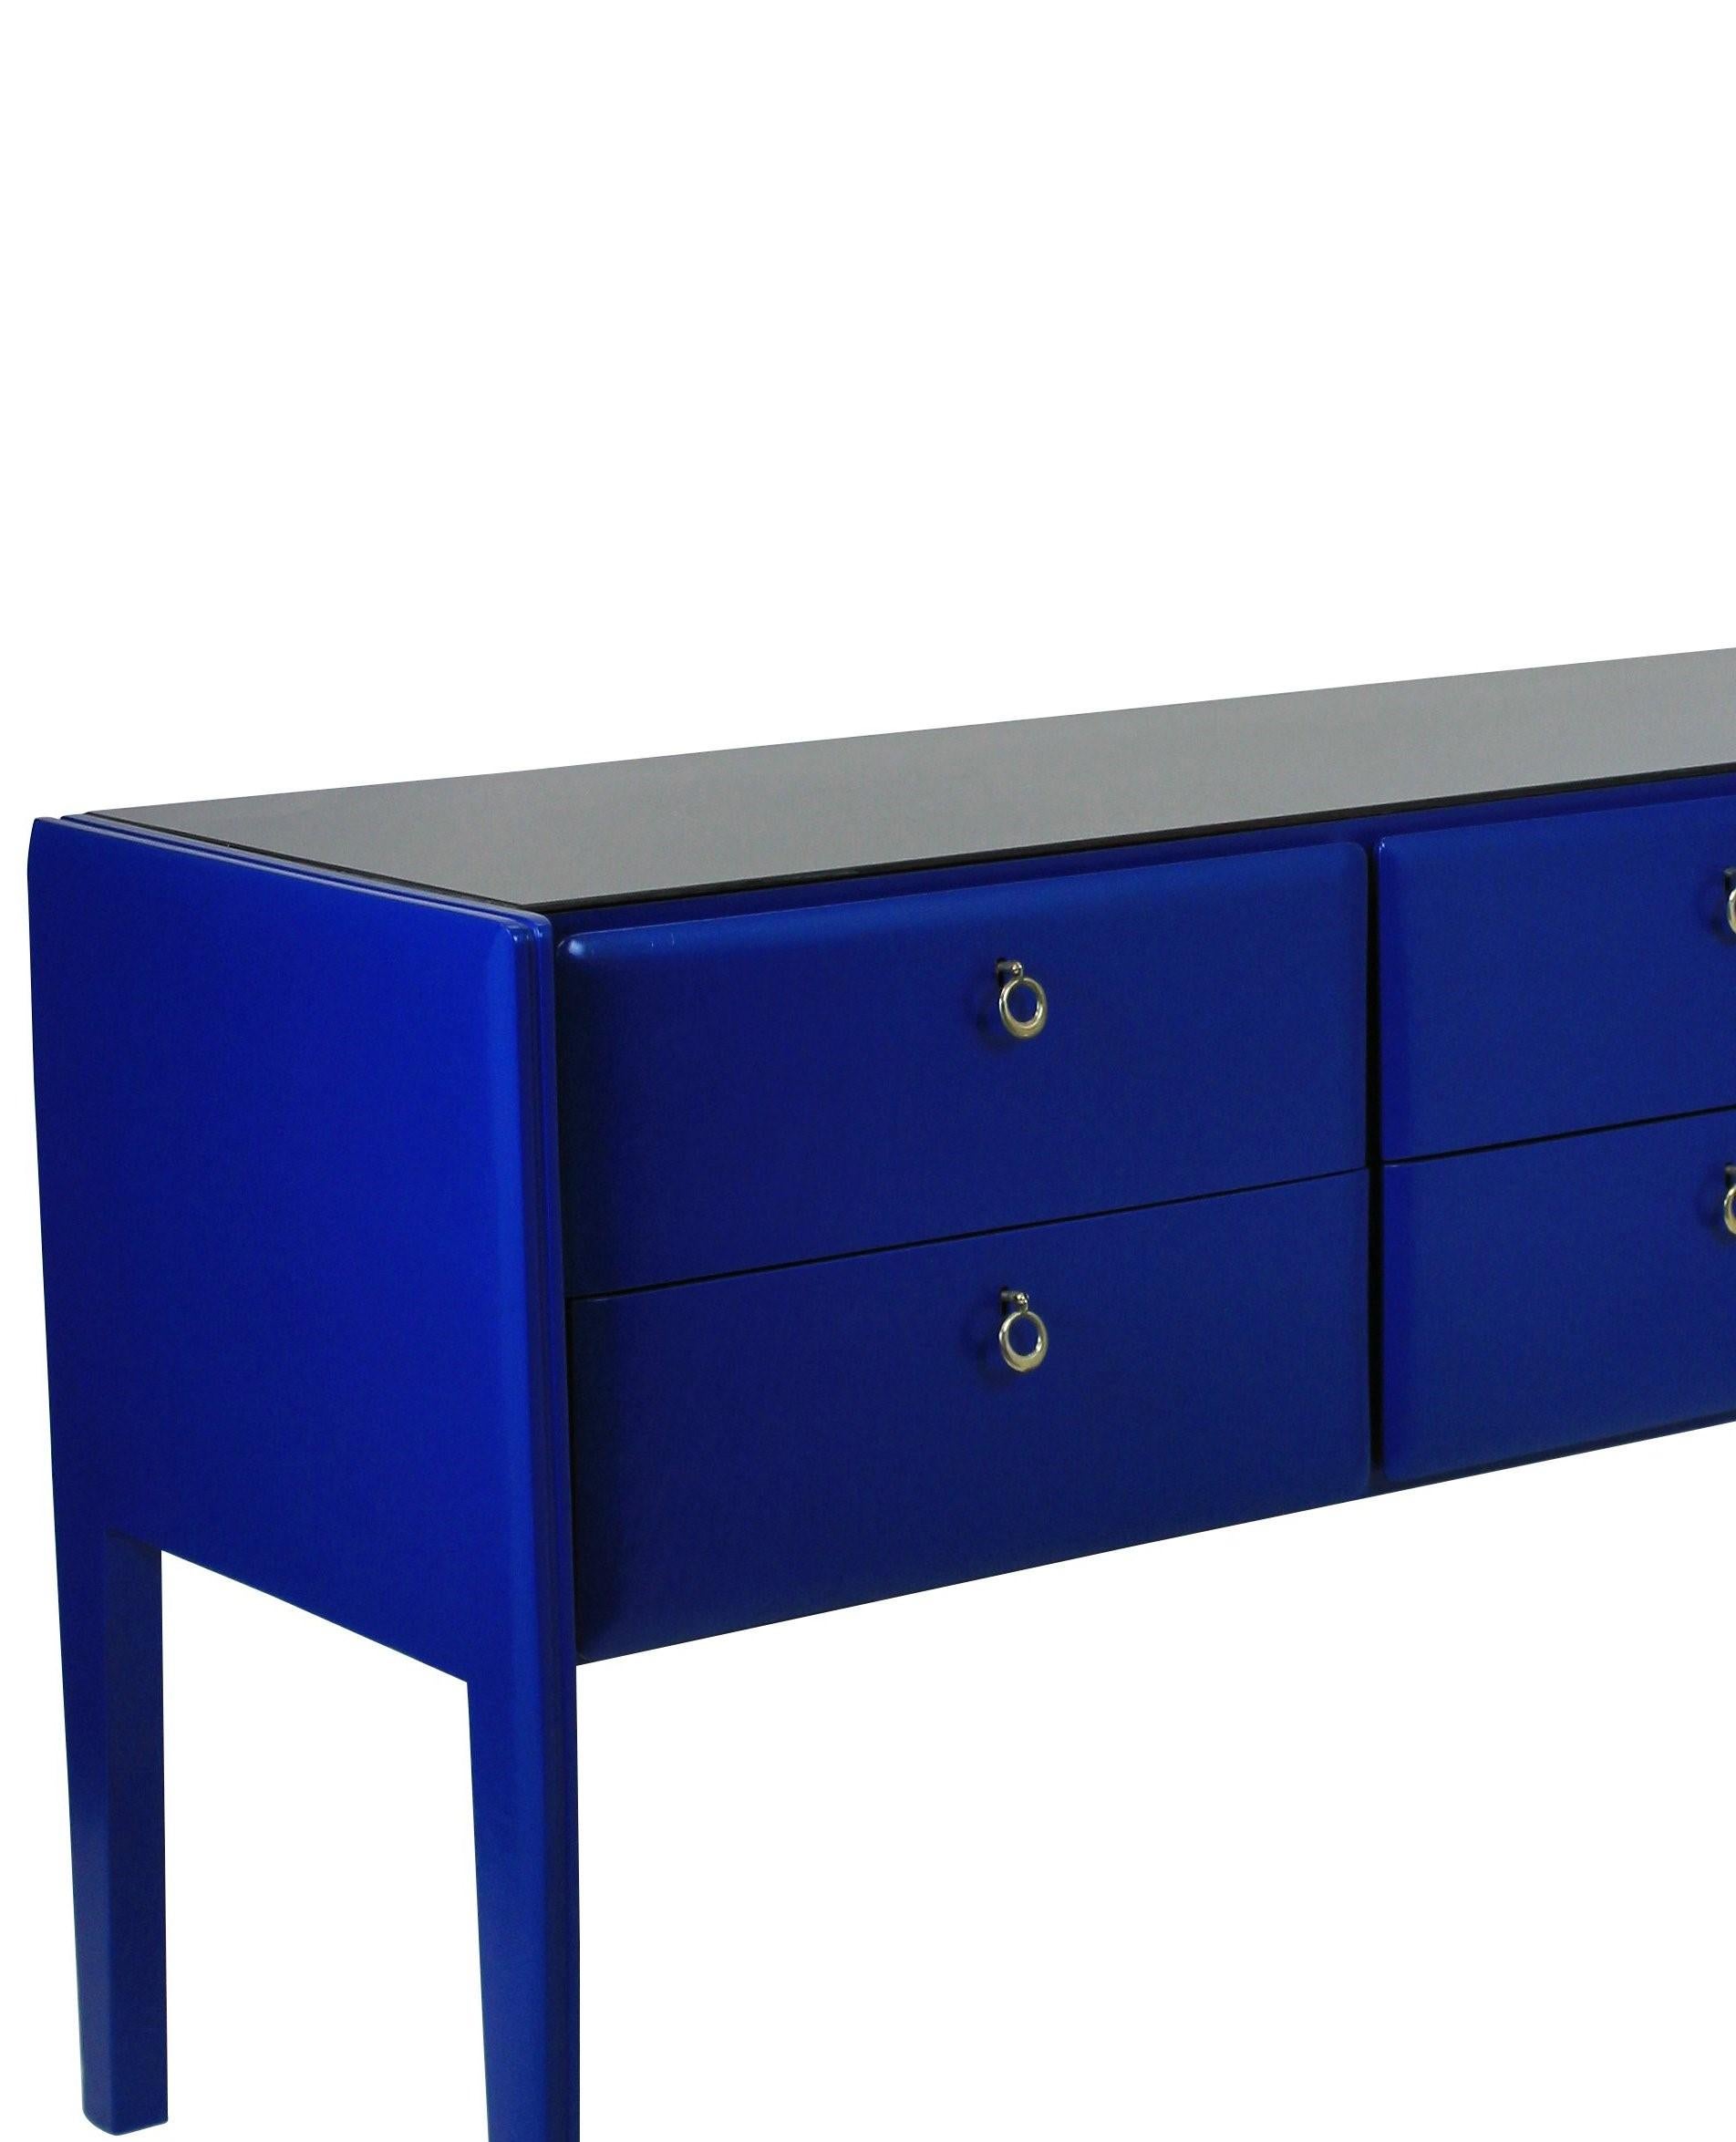 Midcentury Credenza in Cobalt Blue Lacquer In Excellent Condition In London, GB